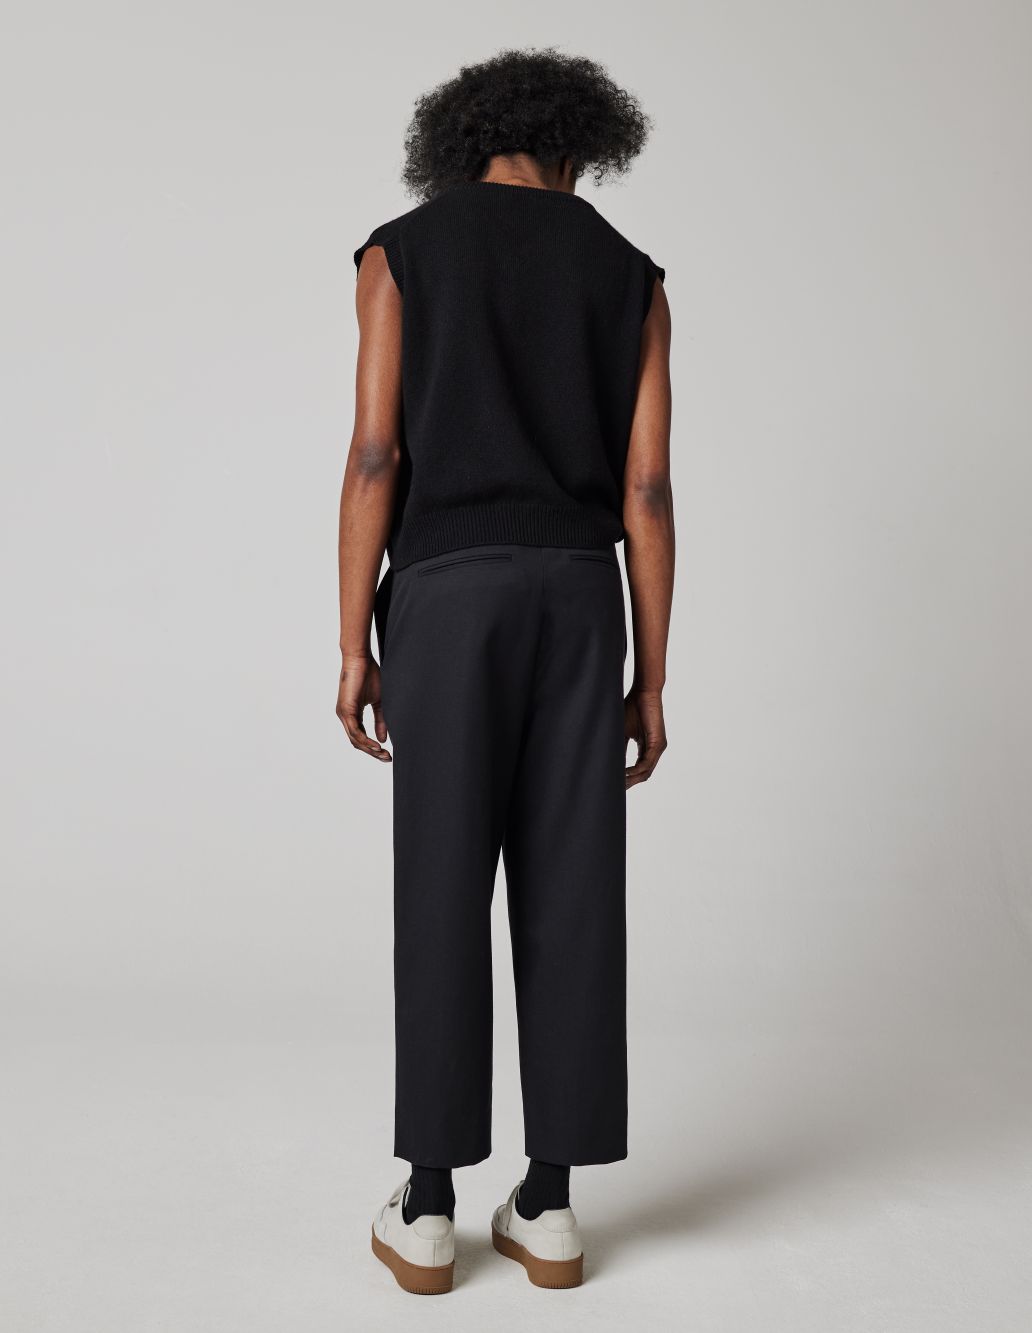 MARGARET HOWELL - Black whipcord wool cotton cropped trouser | Margaret ...